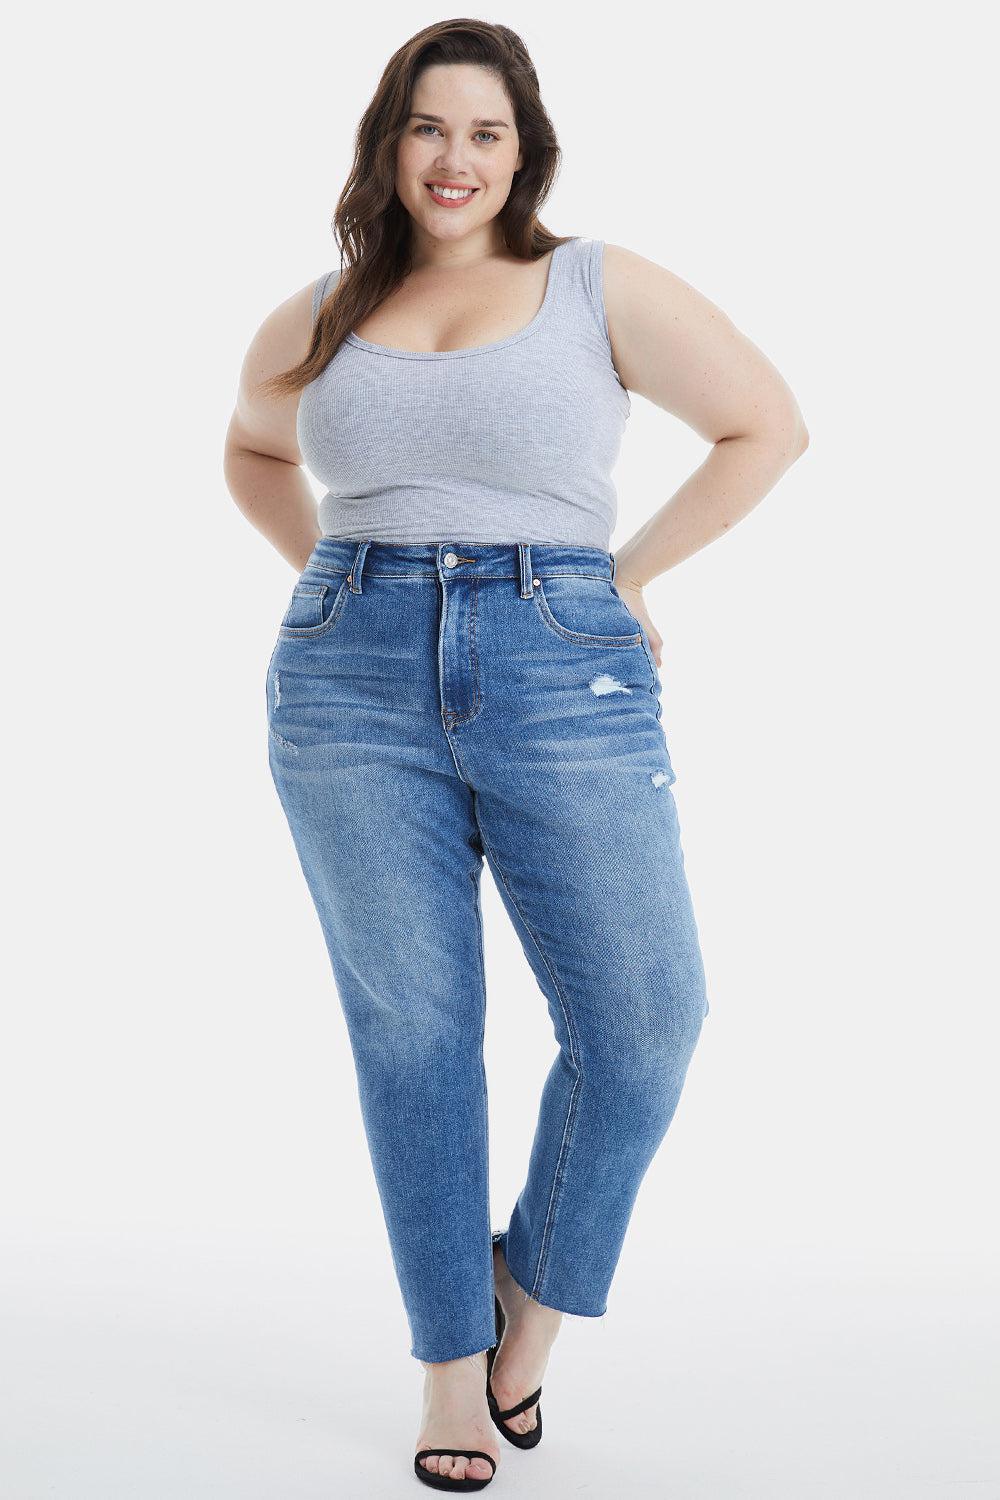 a woman in a tank top and jeans posing for a picture